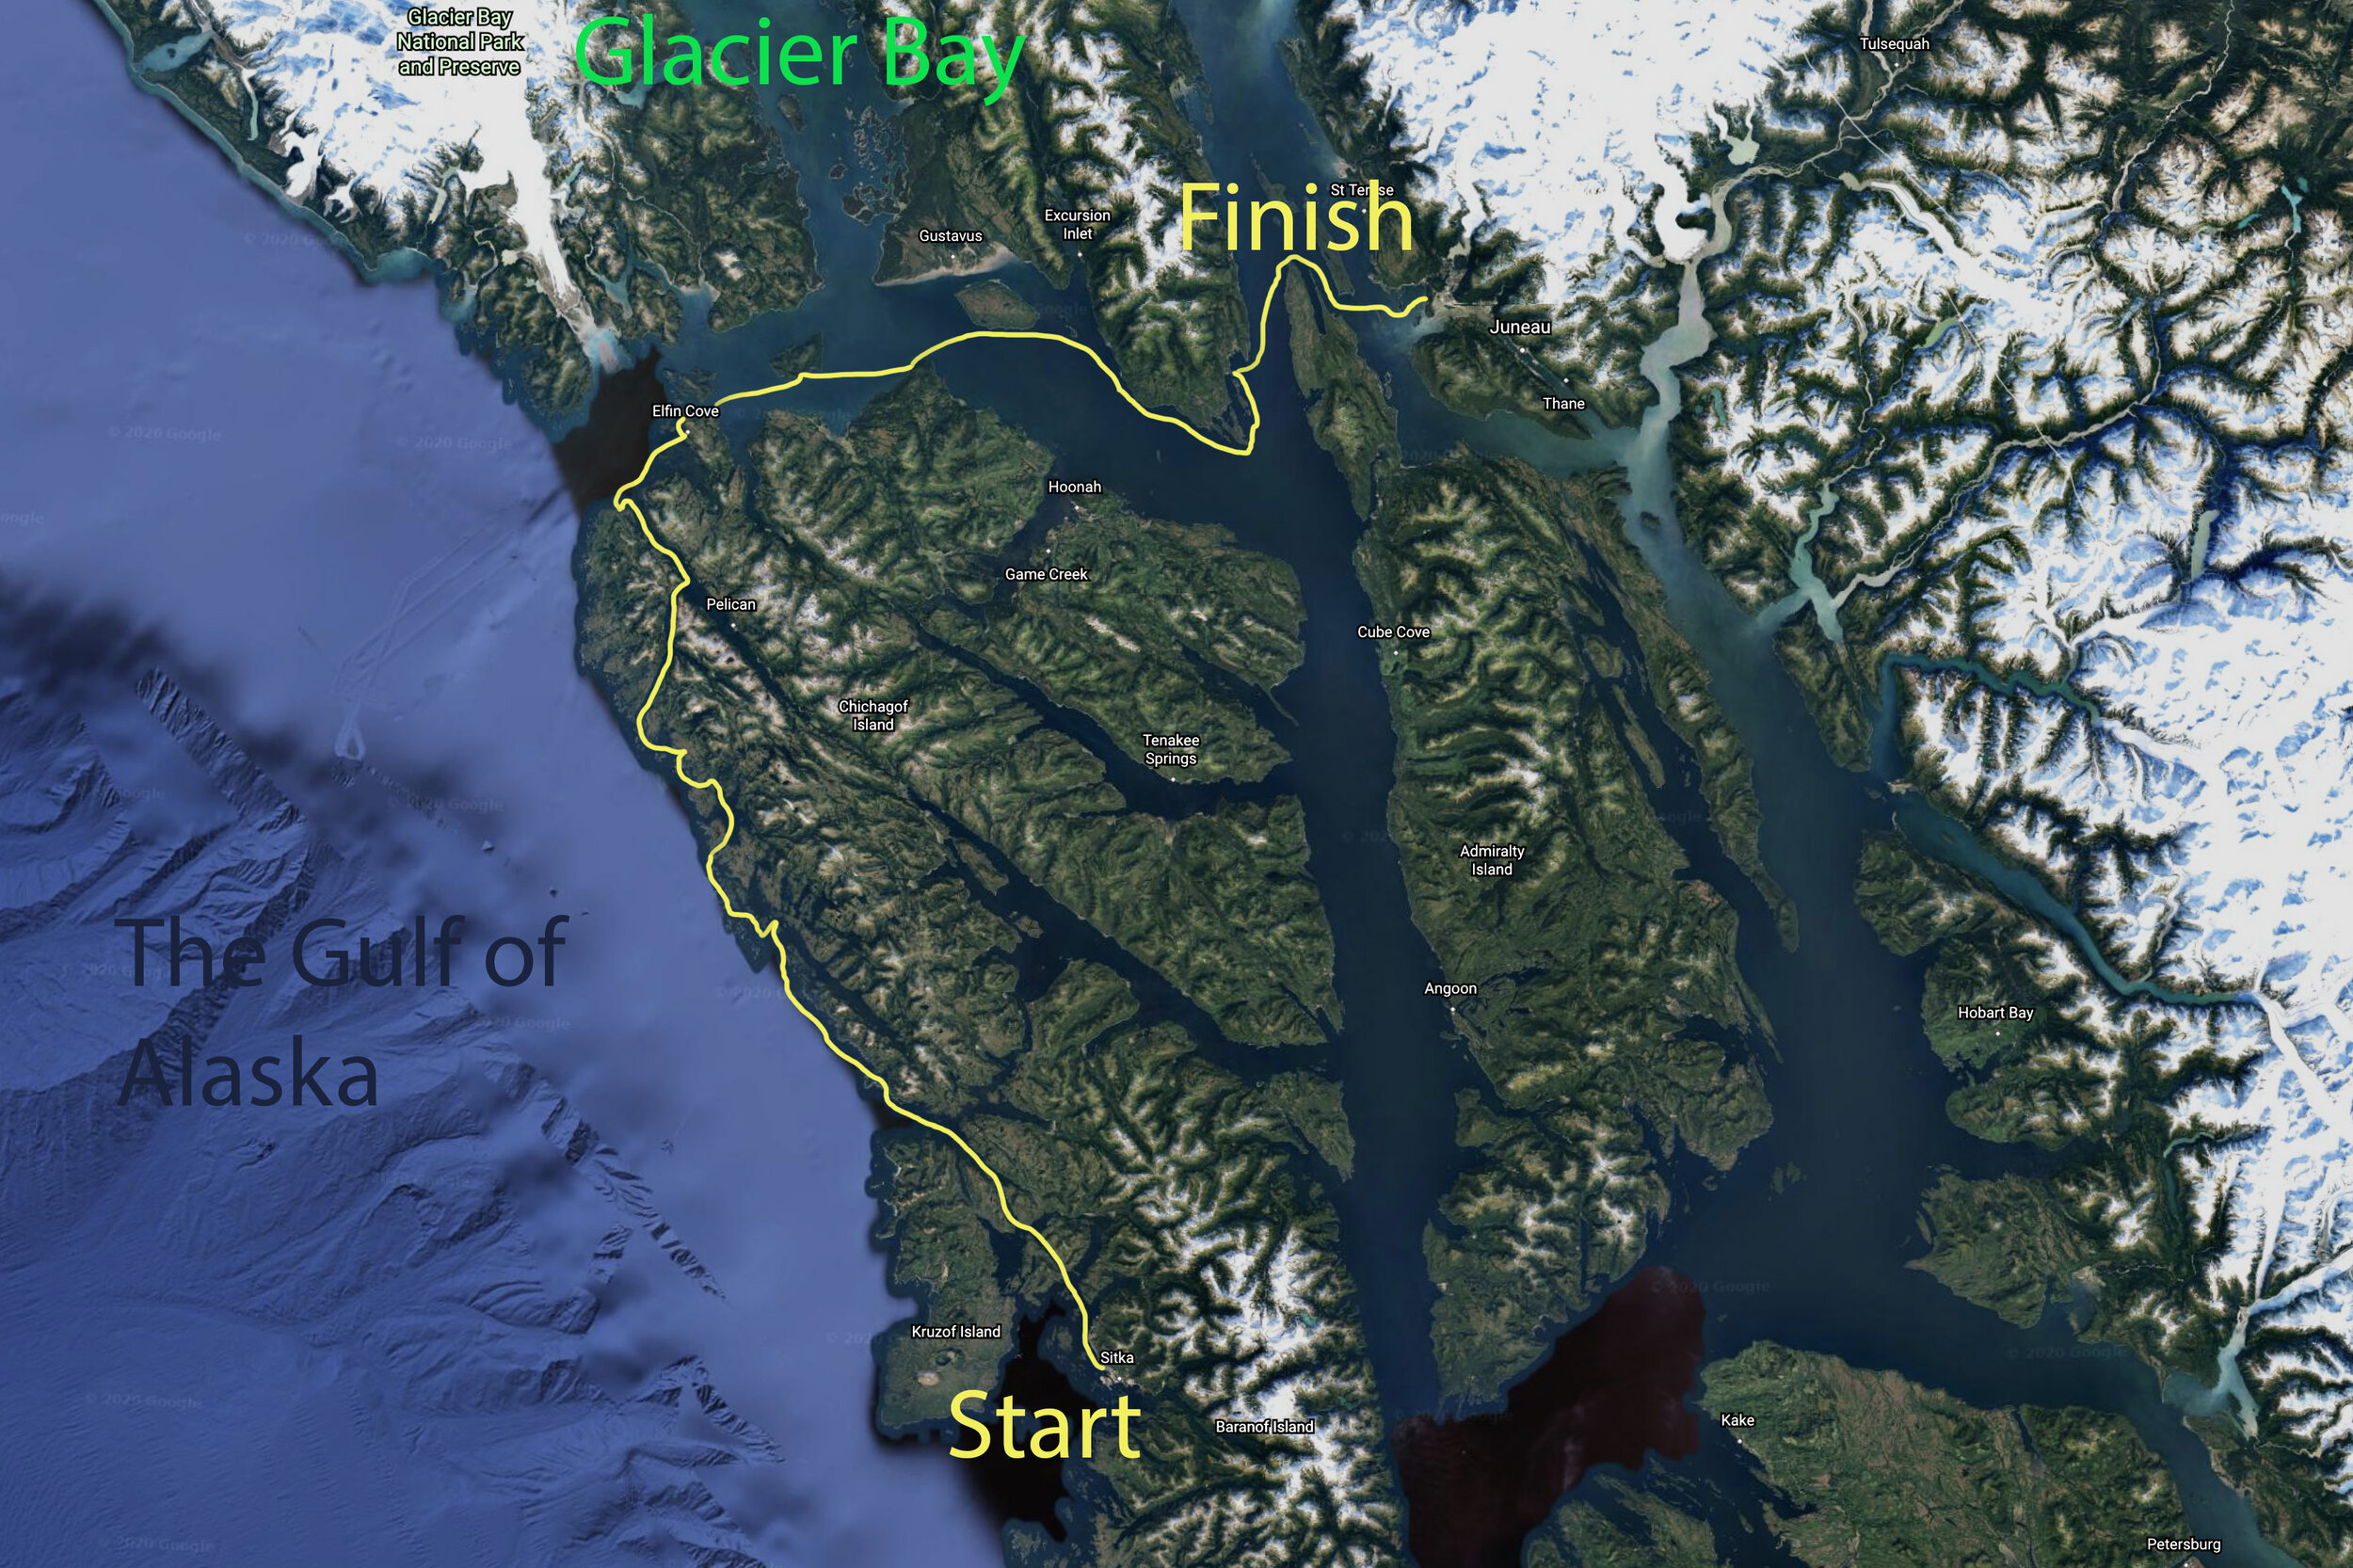  The route we took began on the outside coast of Chichagof and Baranov Islands and then cut into the northern entrance to the Inside Passage via Cross Sound.  